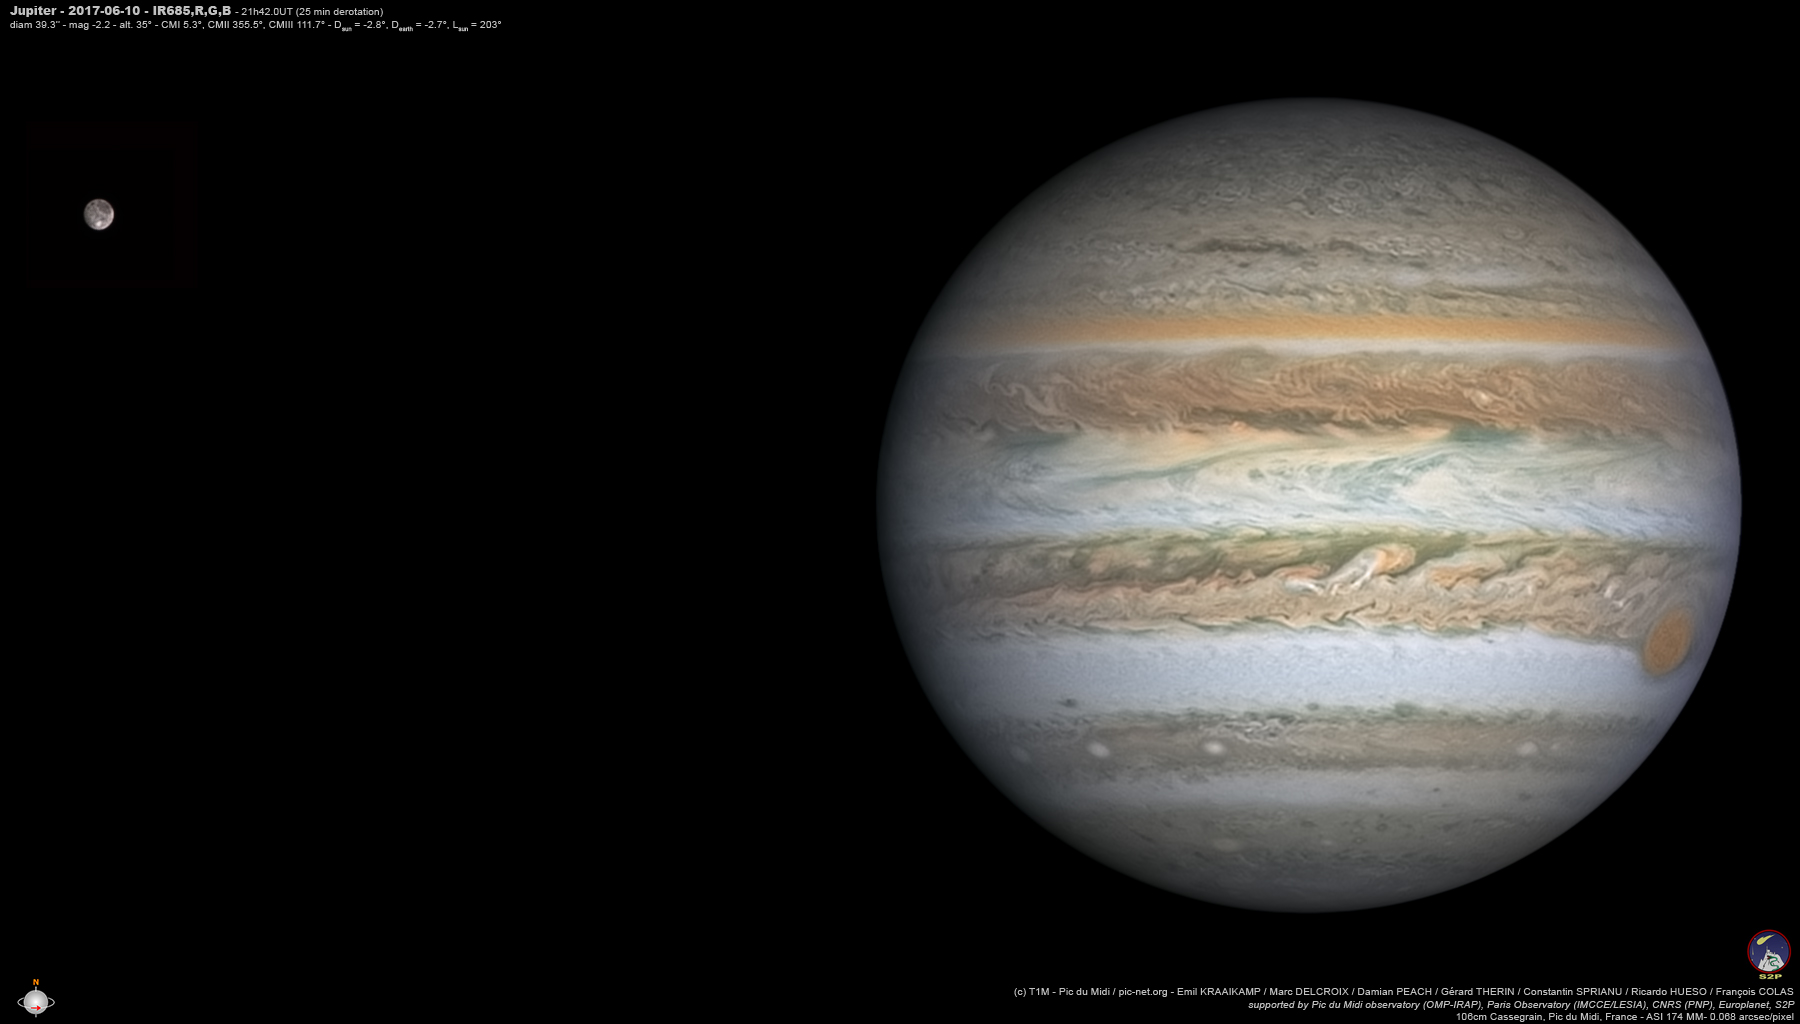 Jupiter images obtained at Pic du Midi show the global state of Jupiter’s atmosphere providing context to the time gaps between observations run by the Juno mission and are the basis for long-term studies. Credit: E. Kraaikamp/ D. Peach/ F. Colas / M. Delcroix / R. Hueso/ C. Sprianu / G. Therin / Pic du Midi Observatory (OMP-IRAP) / Paris Observatory (IMCCE / LESIA) / CNRS (PNP) / Europlanet 2020 RI / S2P